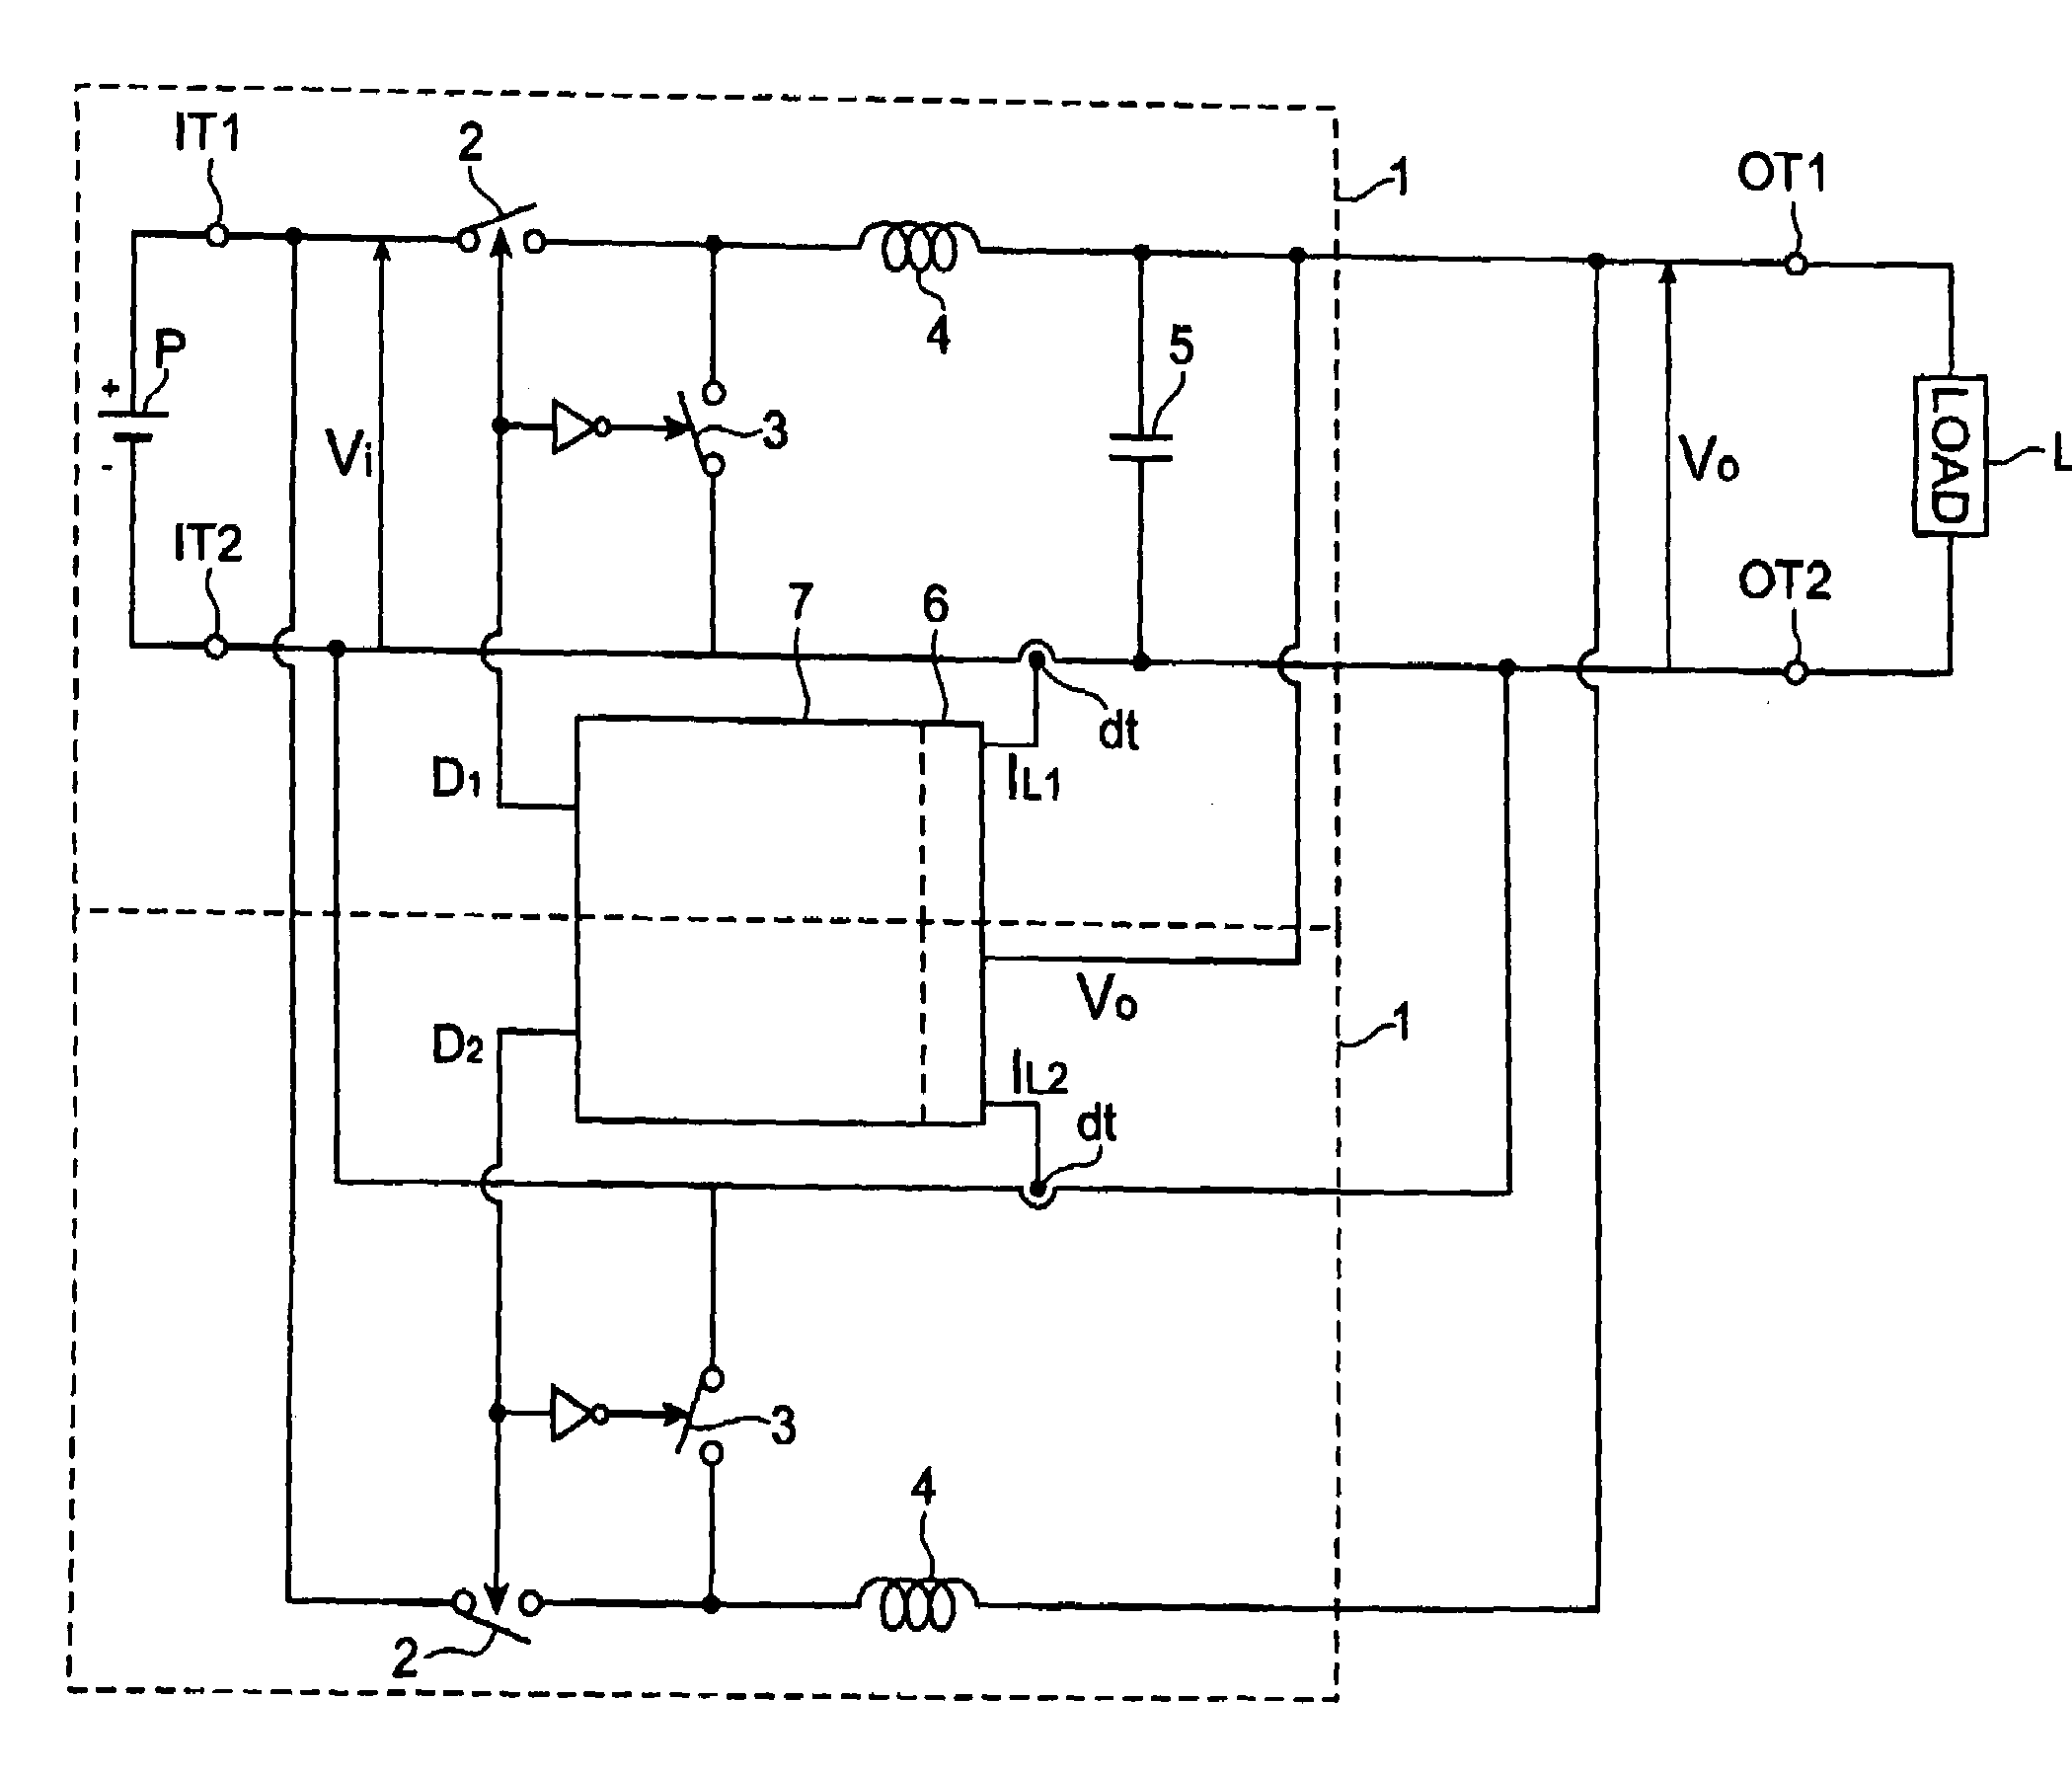 Power supply apparatus and control circuit therefor